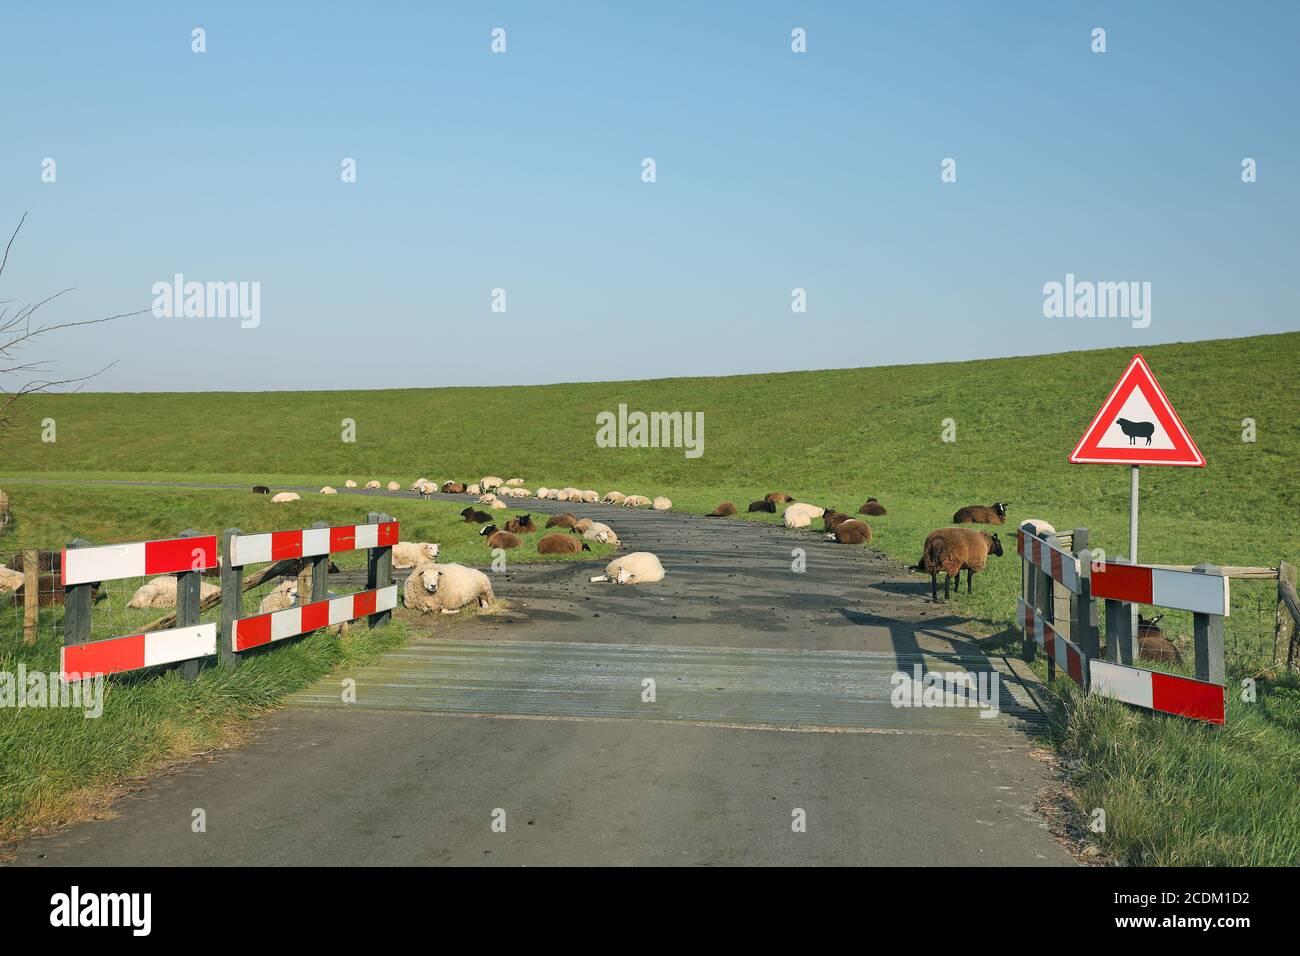 sheep lying on the road at a warning sign 'Beware of the sheep', Netherlands, Northern Netherlands Stock Photo